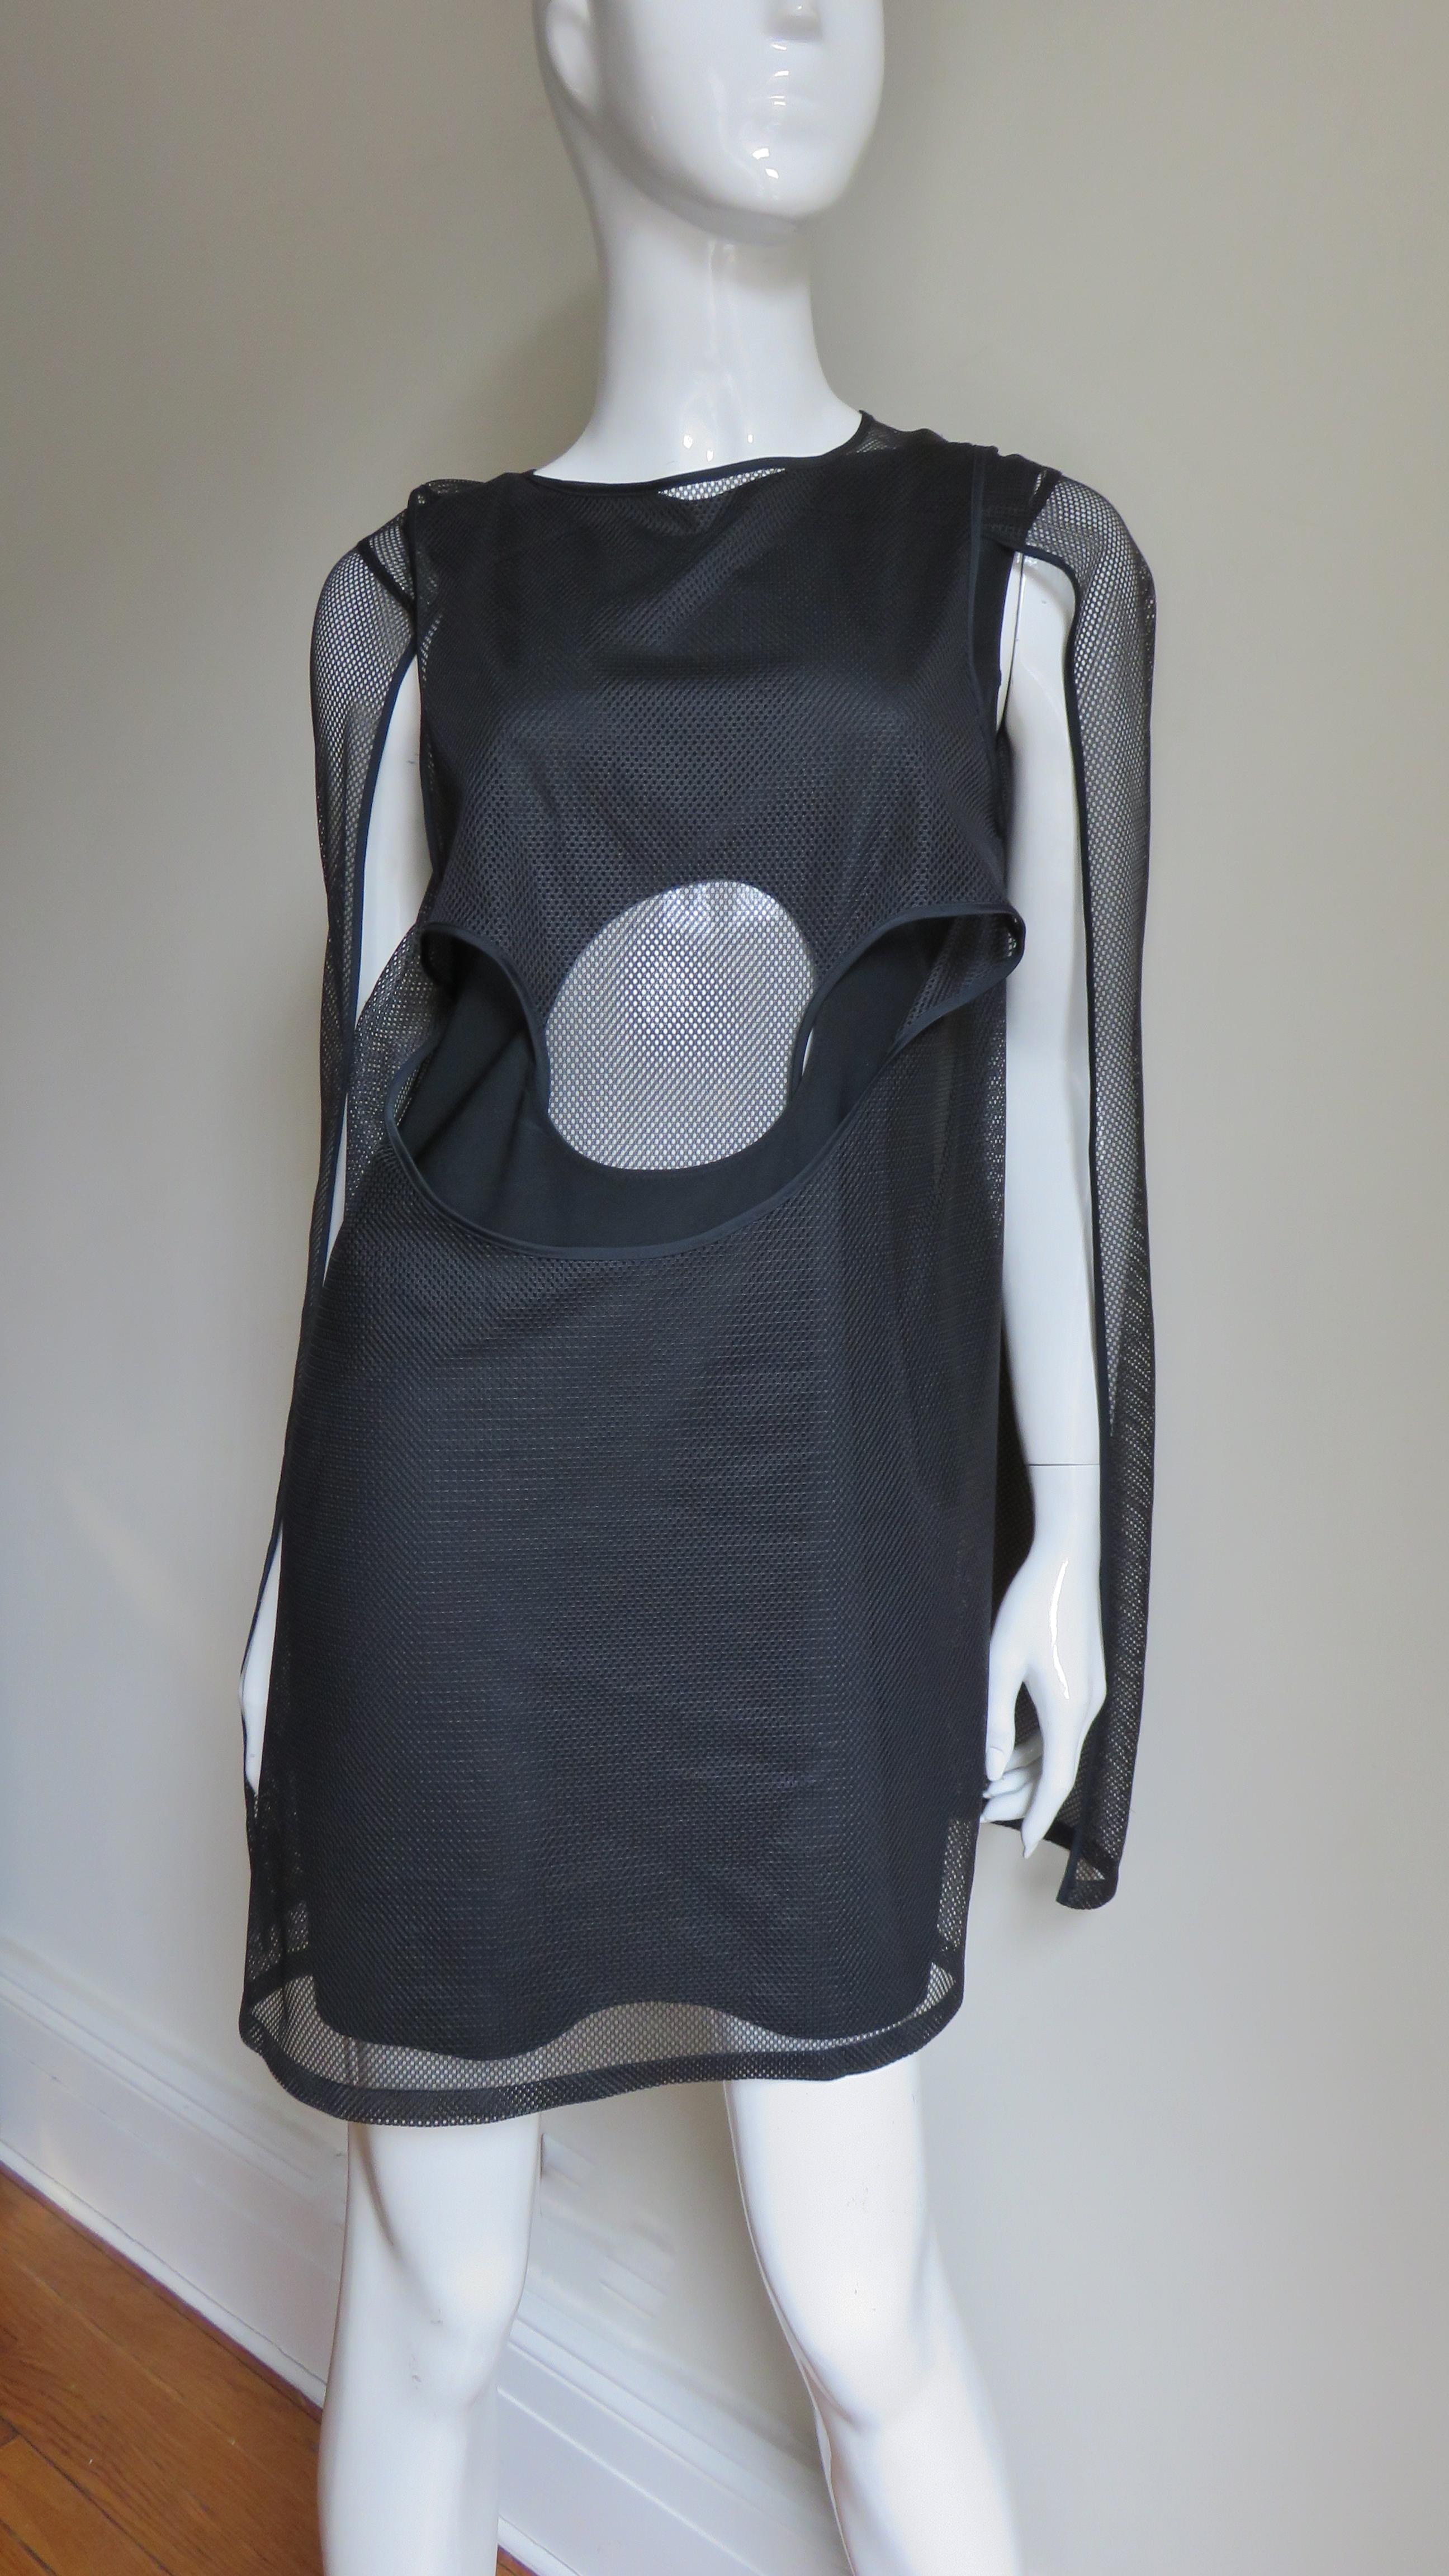 Comme des Garcons Junya Watanabe Dress with Cut Out  In Excellent Condition For Sale In Water Mill, NY